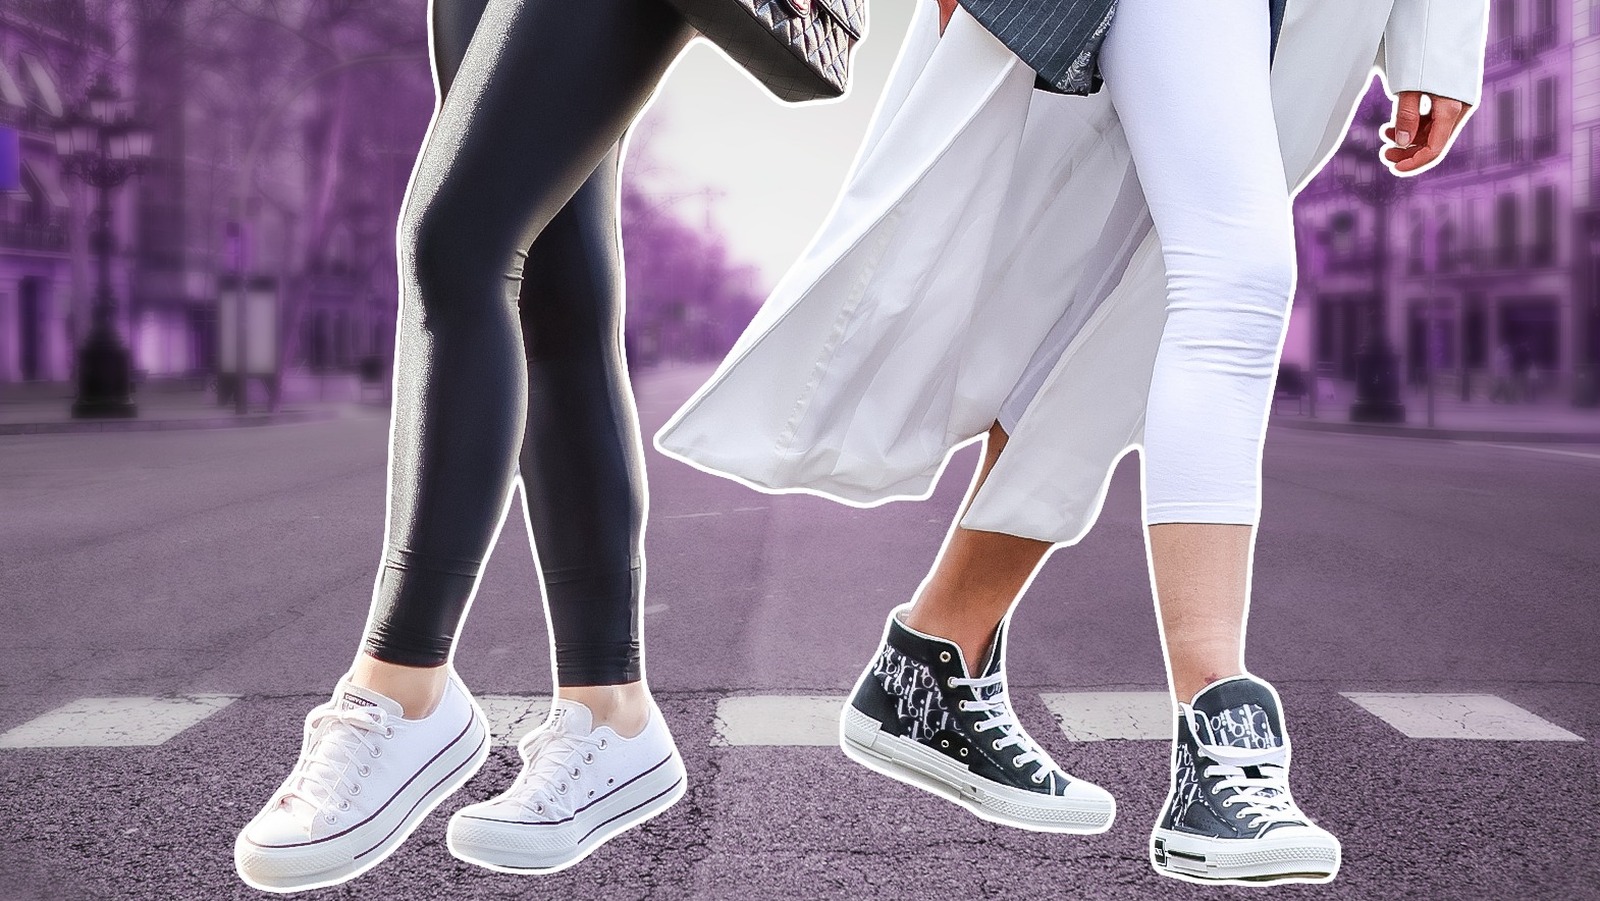 https://www.glam.com/img/gallery/wearing-canvas-sneakers-with-leggings-is-outdated-heres-what-to-wear-instead/l-intro-1693369626.jpg